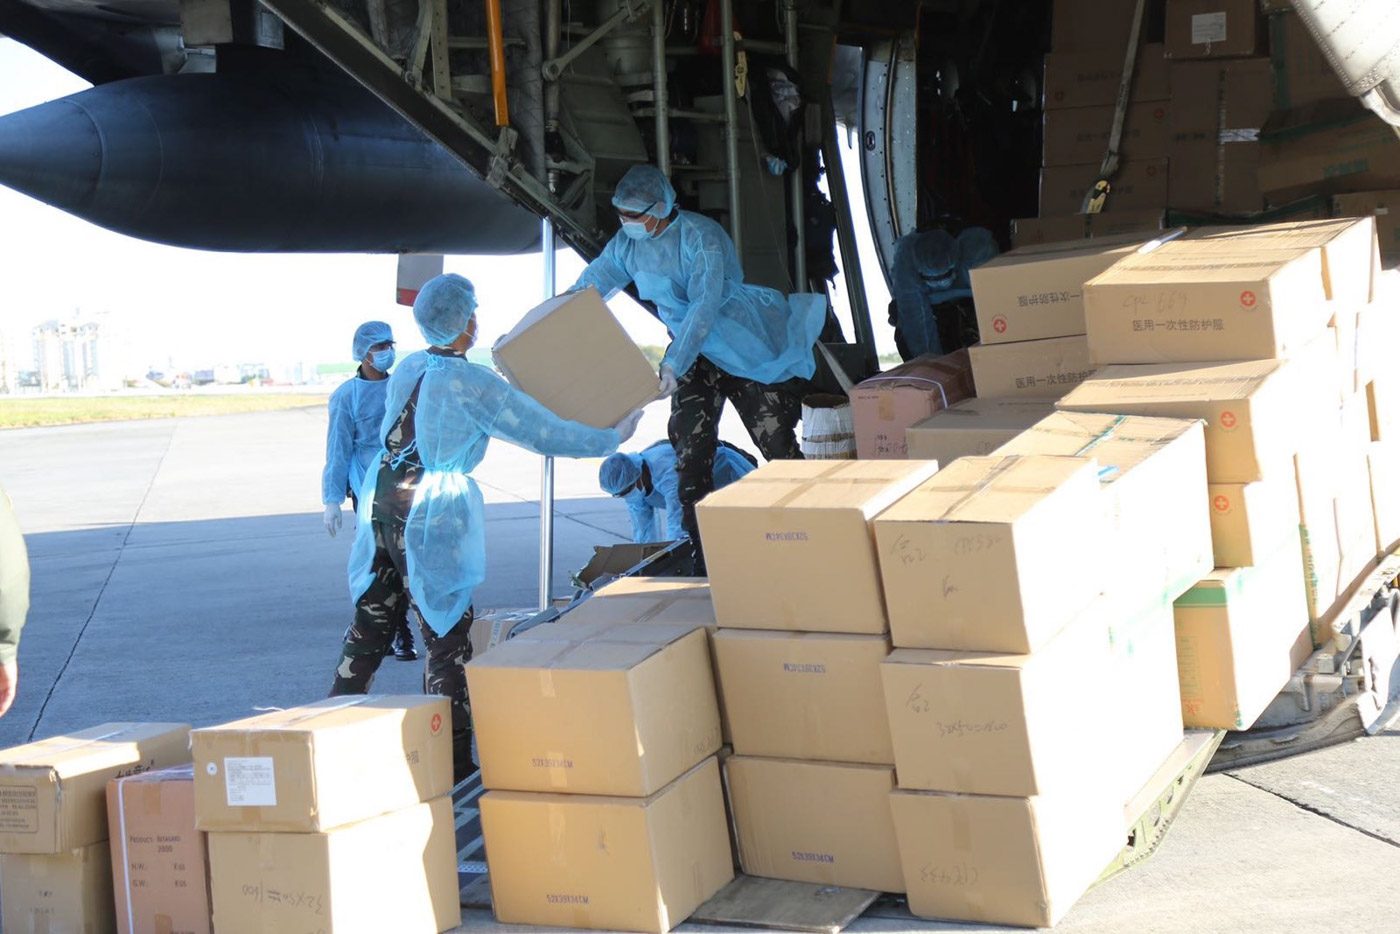 EQUIPMENT, SUPPLIES. Soldiers unload donated cargo from the Philippine Air Force's C-130 plane at Villamor Airbase on March 21, 2020. Photo from the Armed Forces of the Philippines 